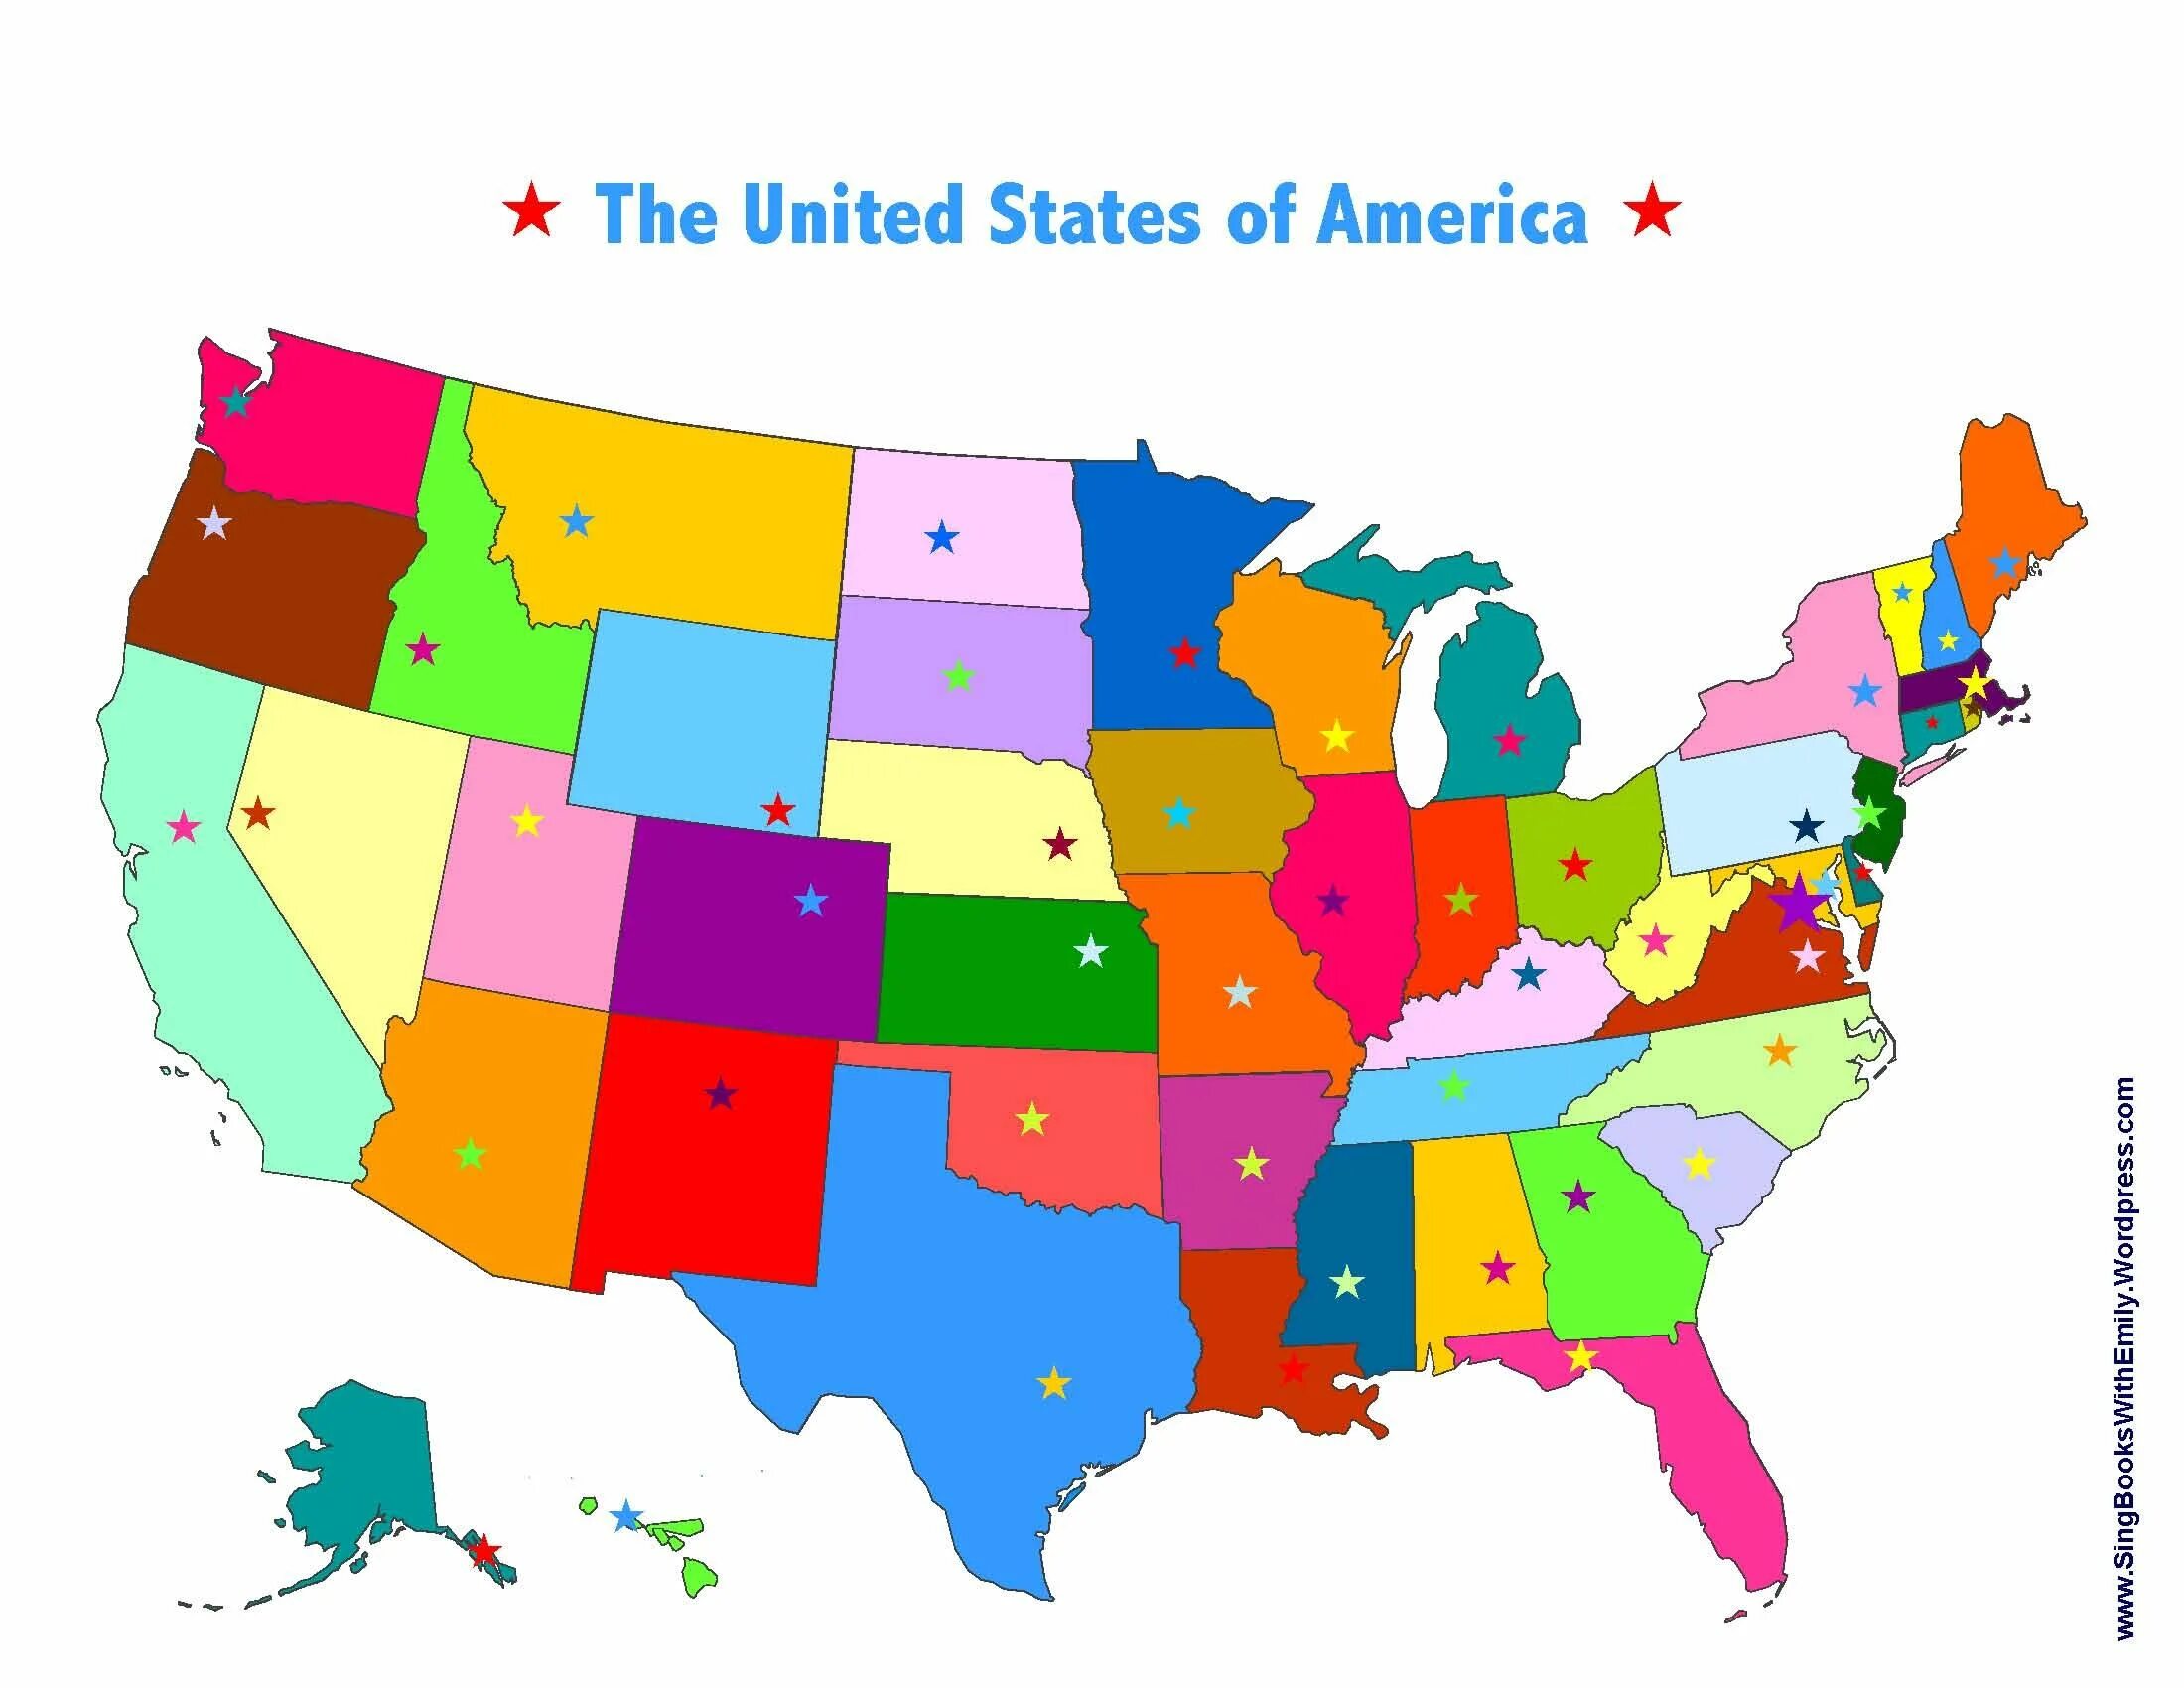 The United States of America карта. USA States Map. USA 50 States. USA States and Capitals Map. 1970 год символ штата сша